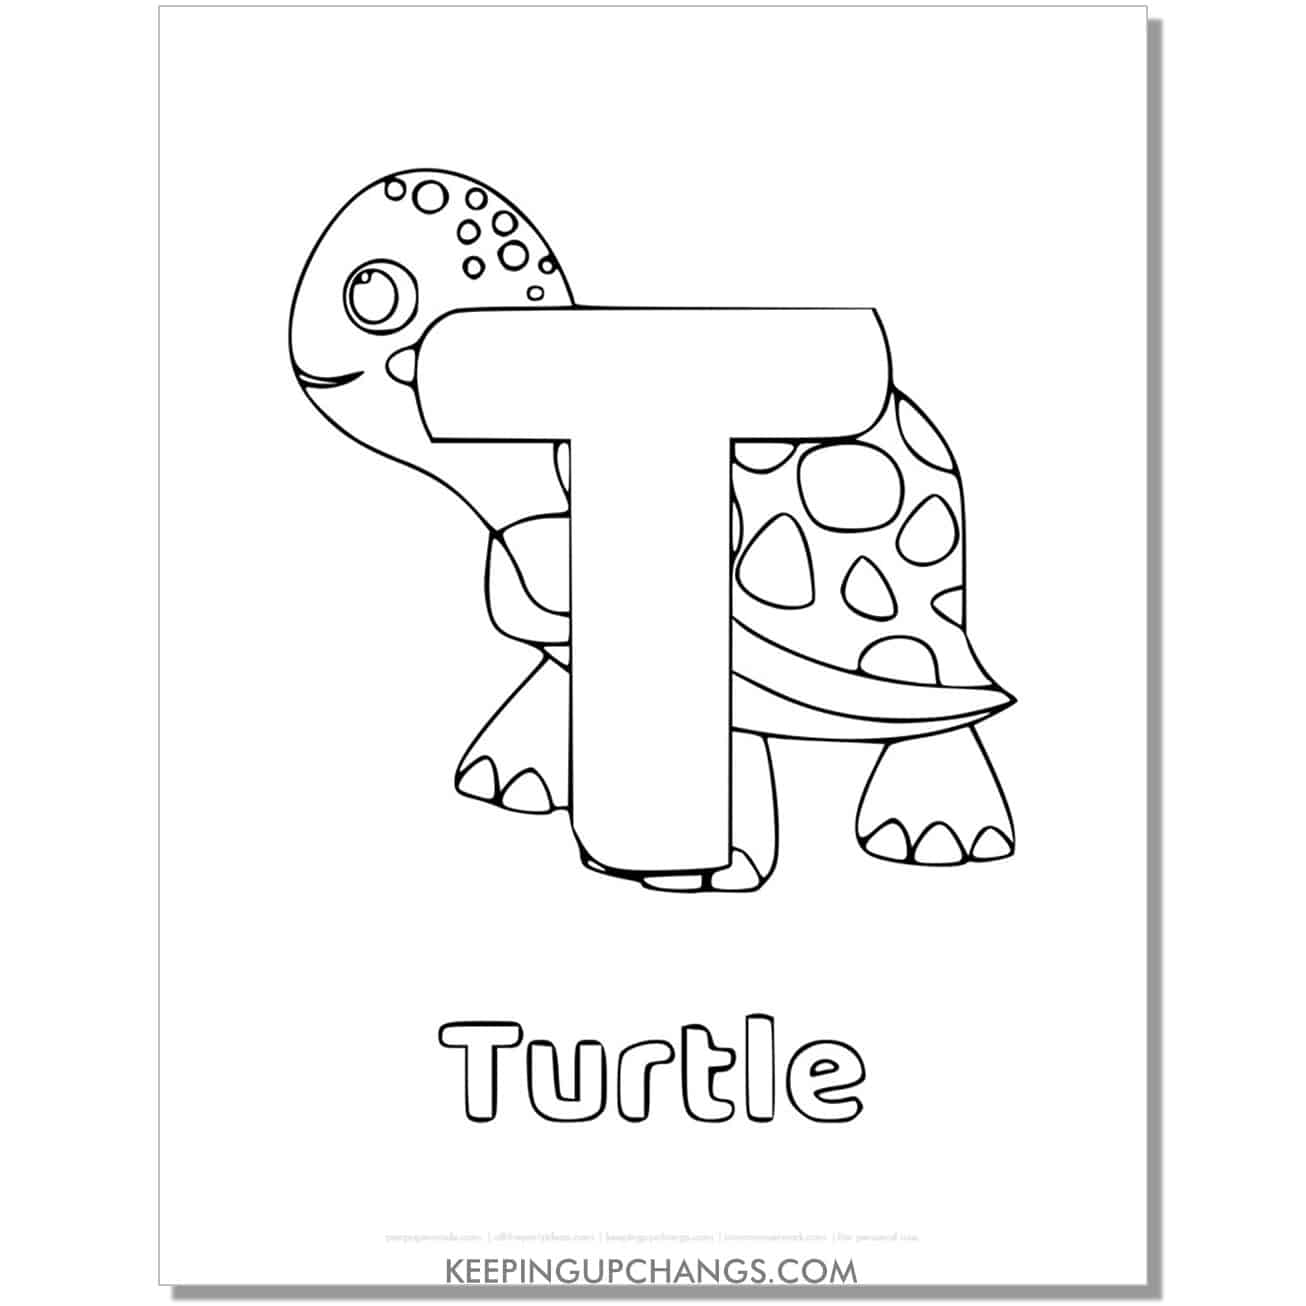 alphabet t coloring worksheet with turtle.